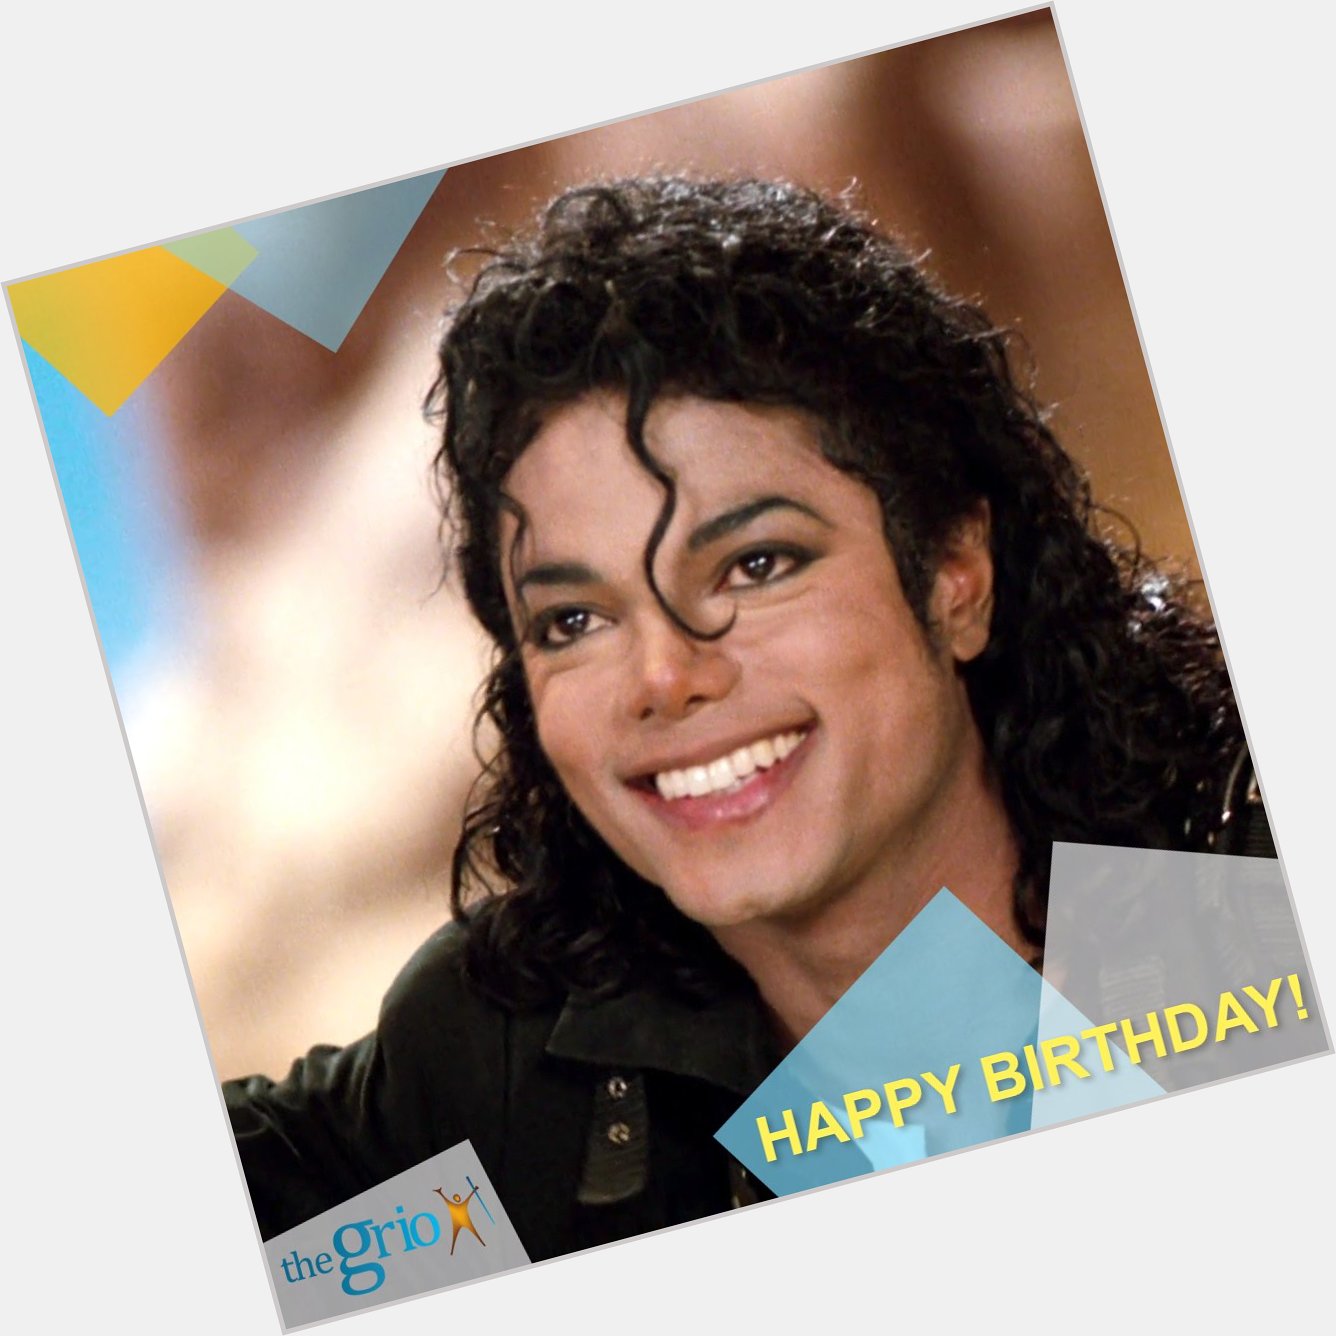 Happy Birthday to the King of Pop, Michael Jackson. You will forever be missed!  